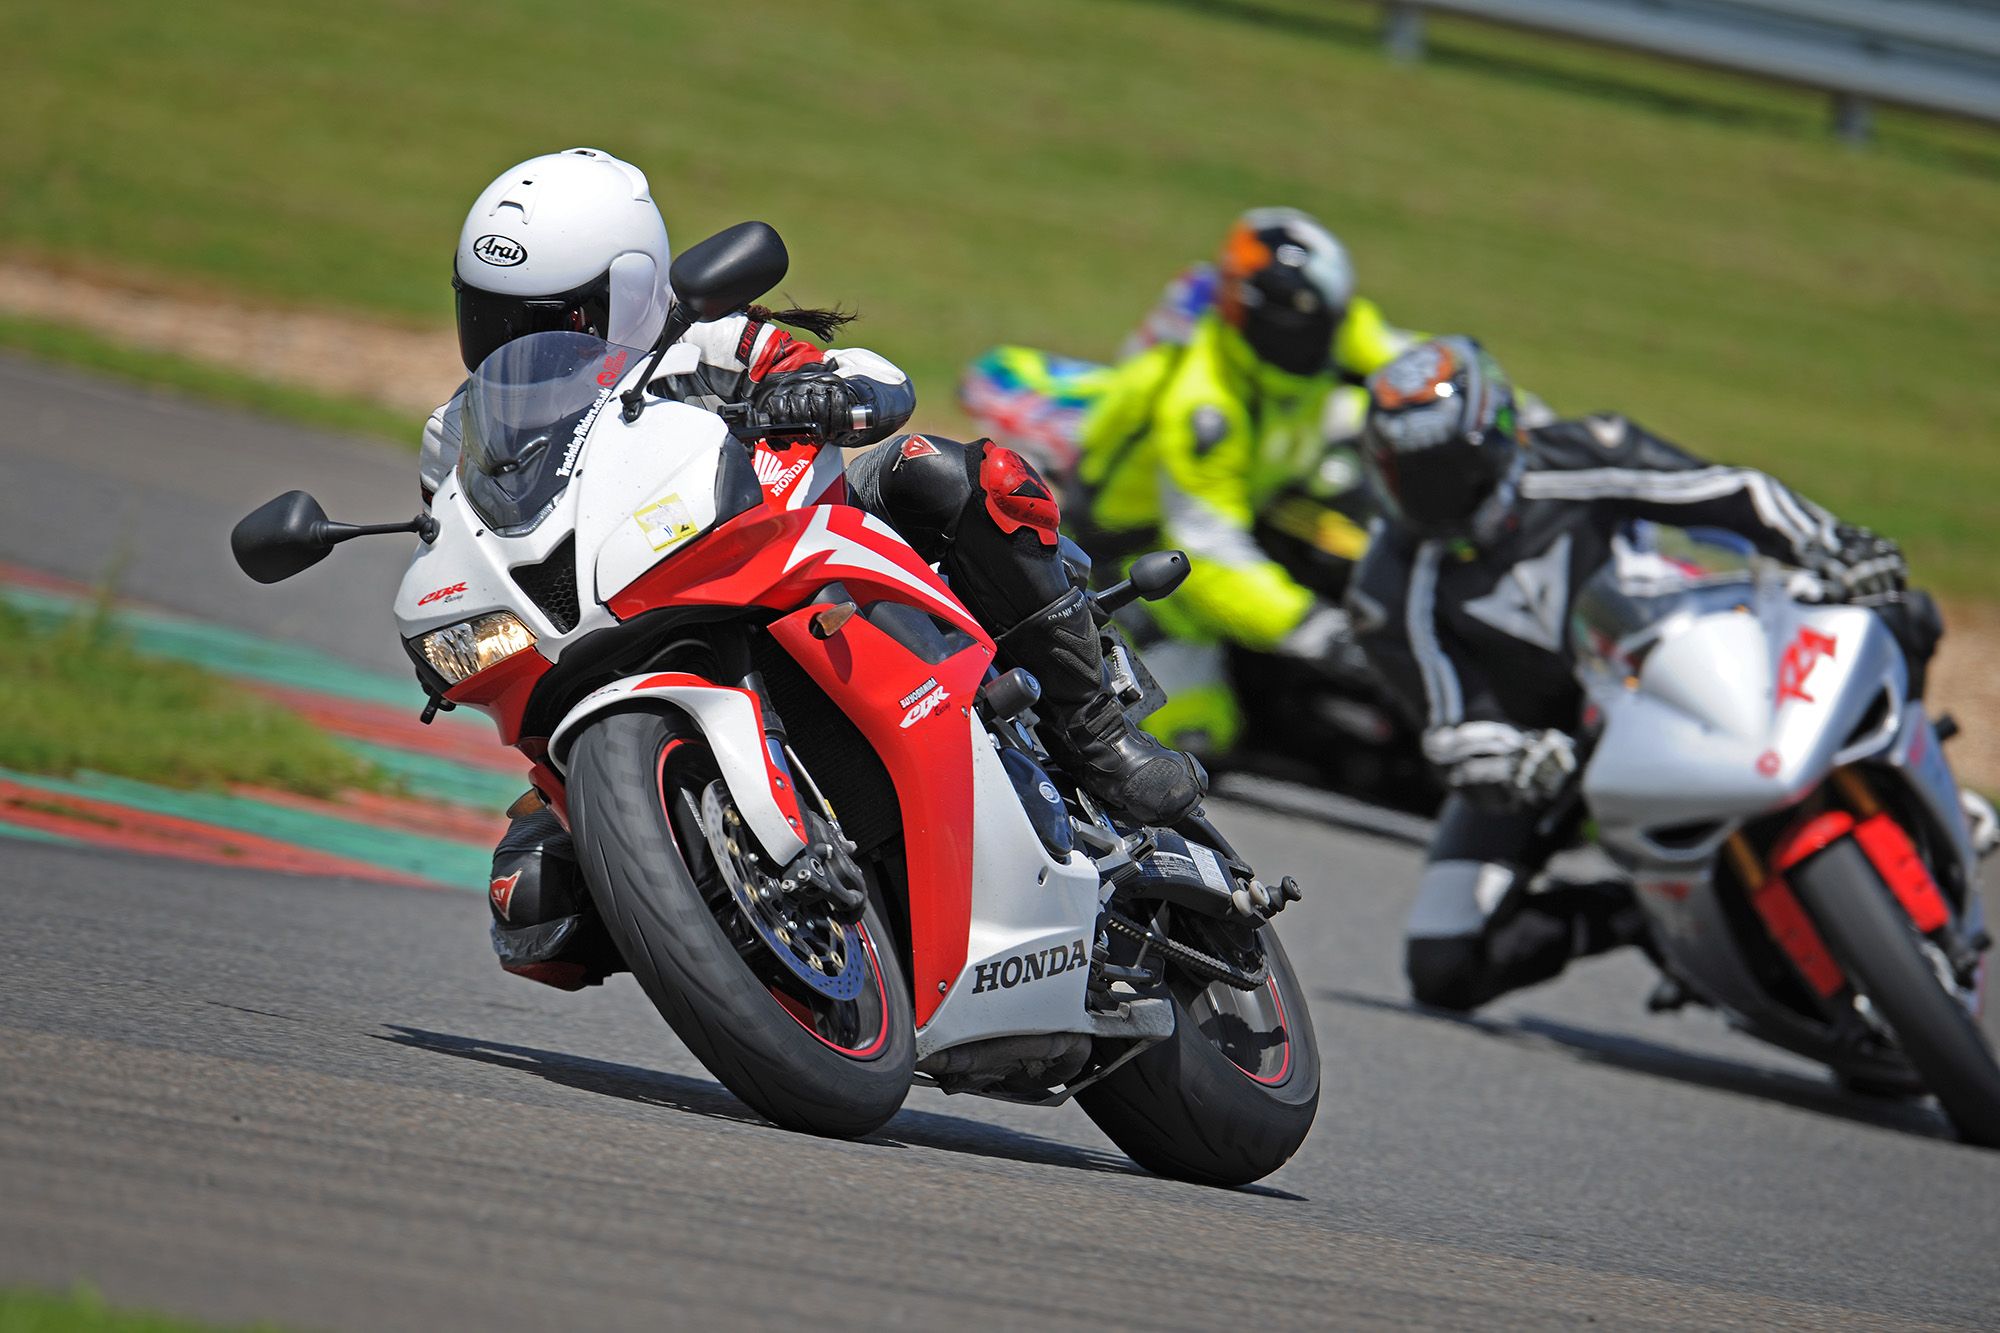 Polly Lee on her Honda CBR at a trackday